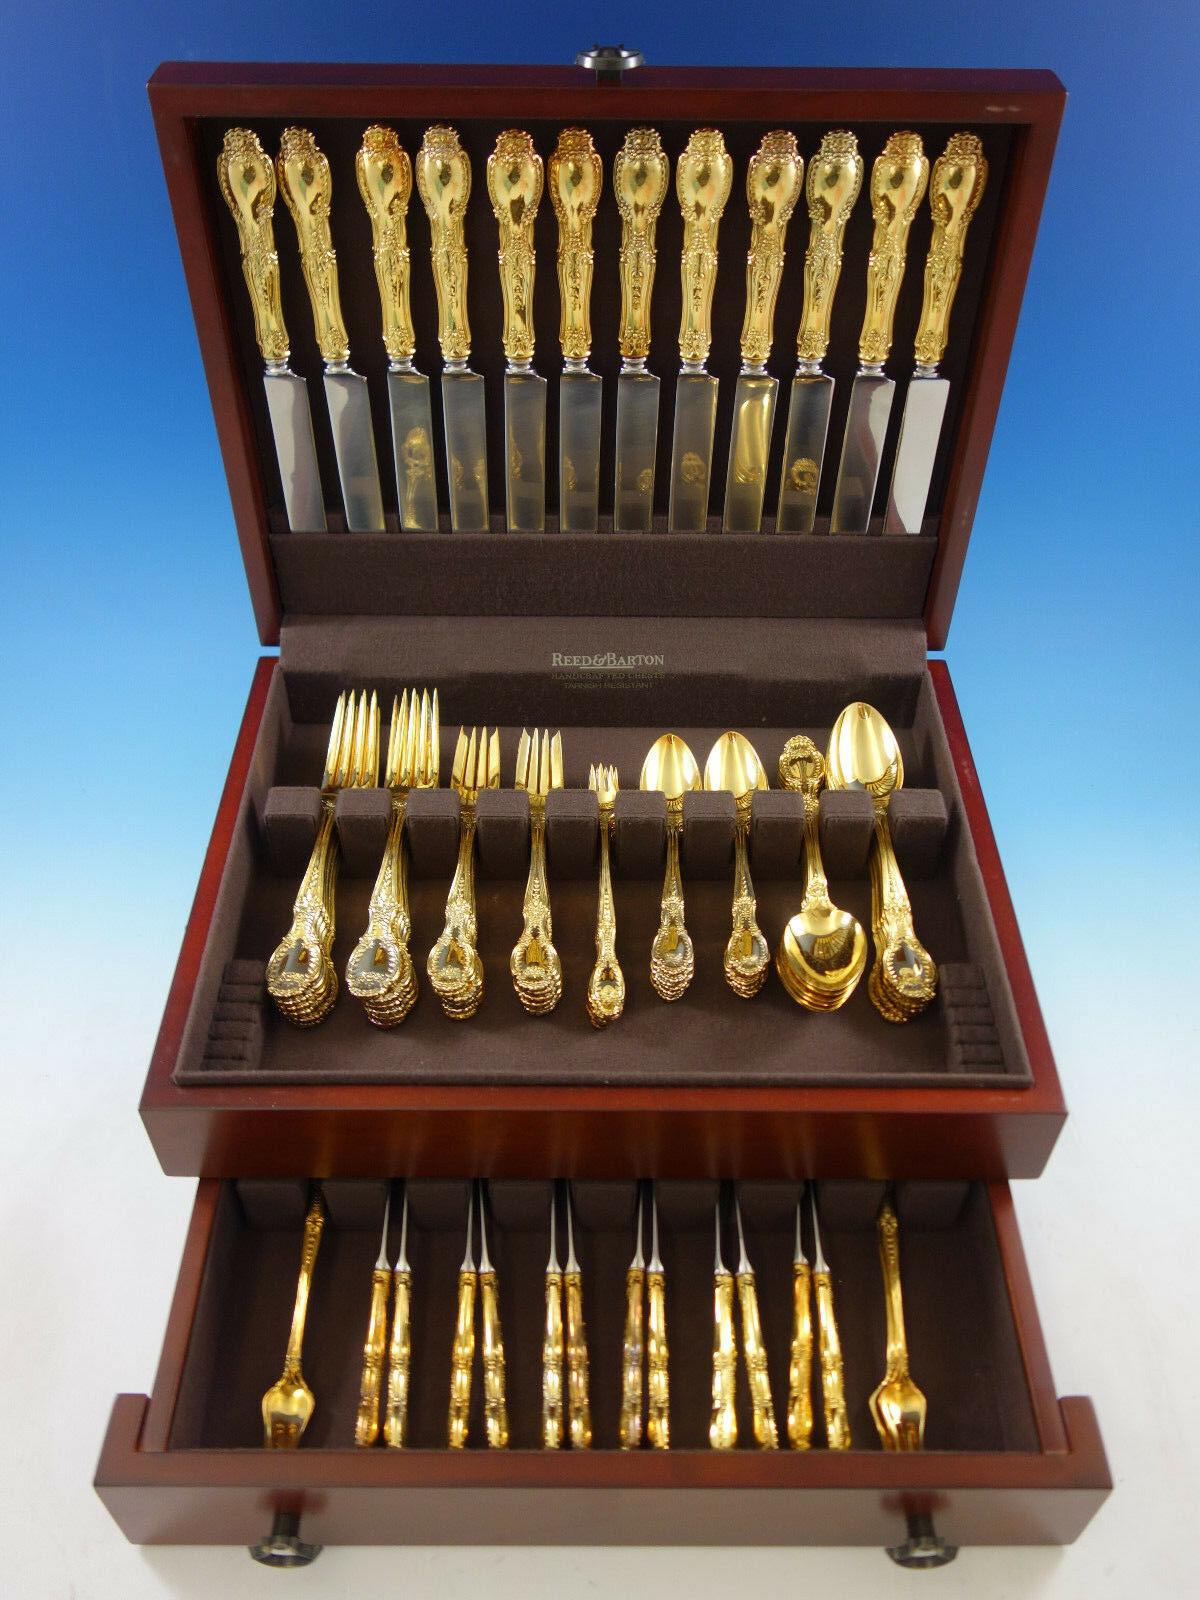 Gorgeous dinner size Richelieu by Tiffany & Co. vermeil (completely gold-washed) sterling silver Flatware set, 84 pieces. This set includes:

12 dinner size knives, 10 1/4